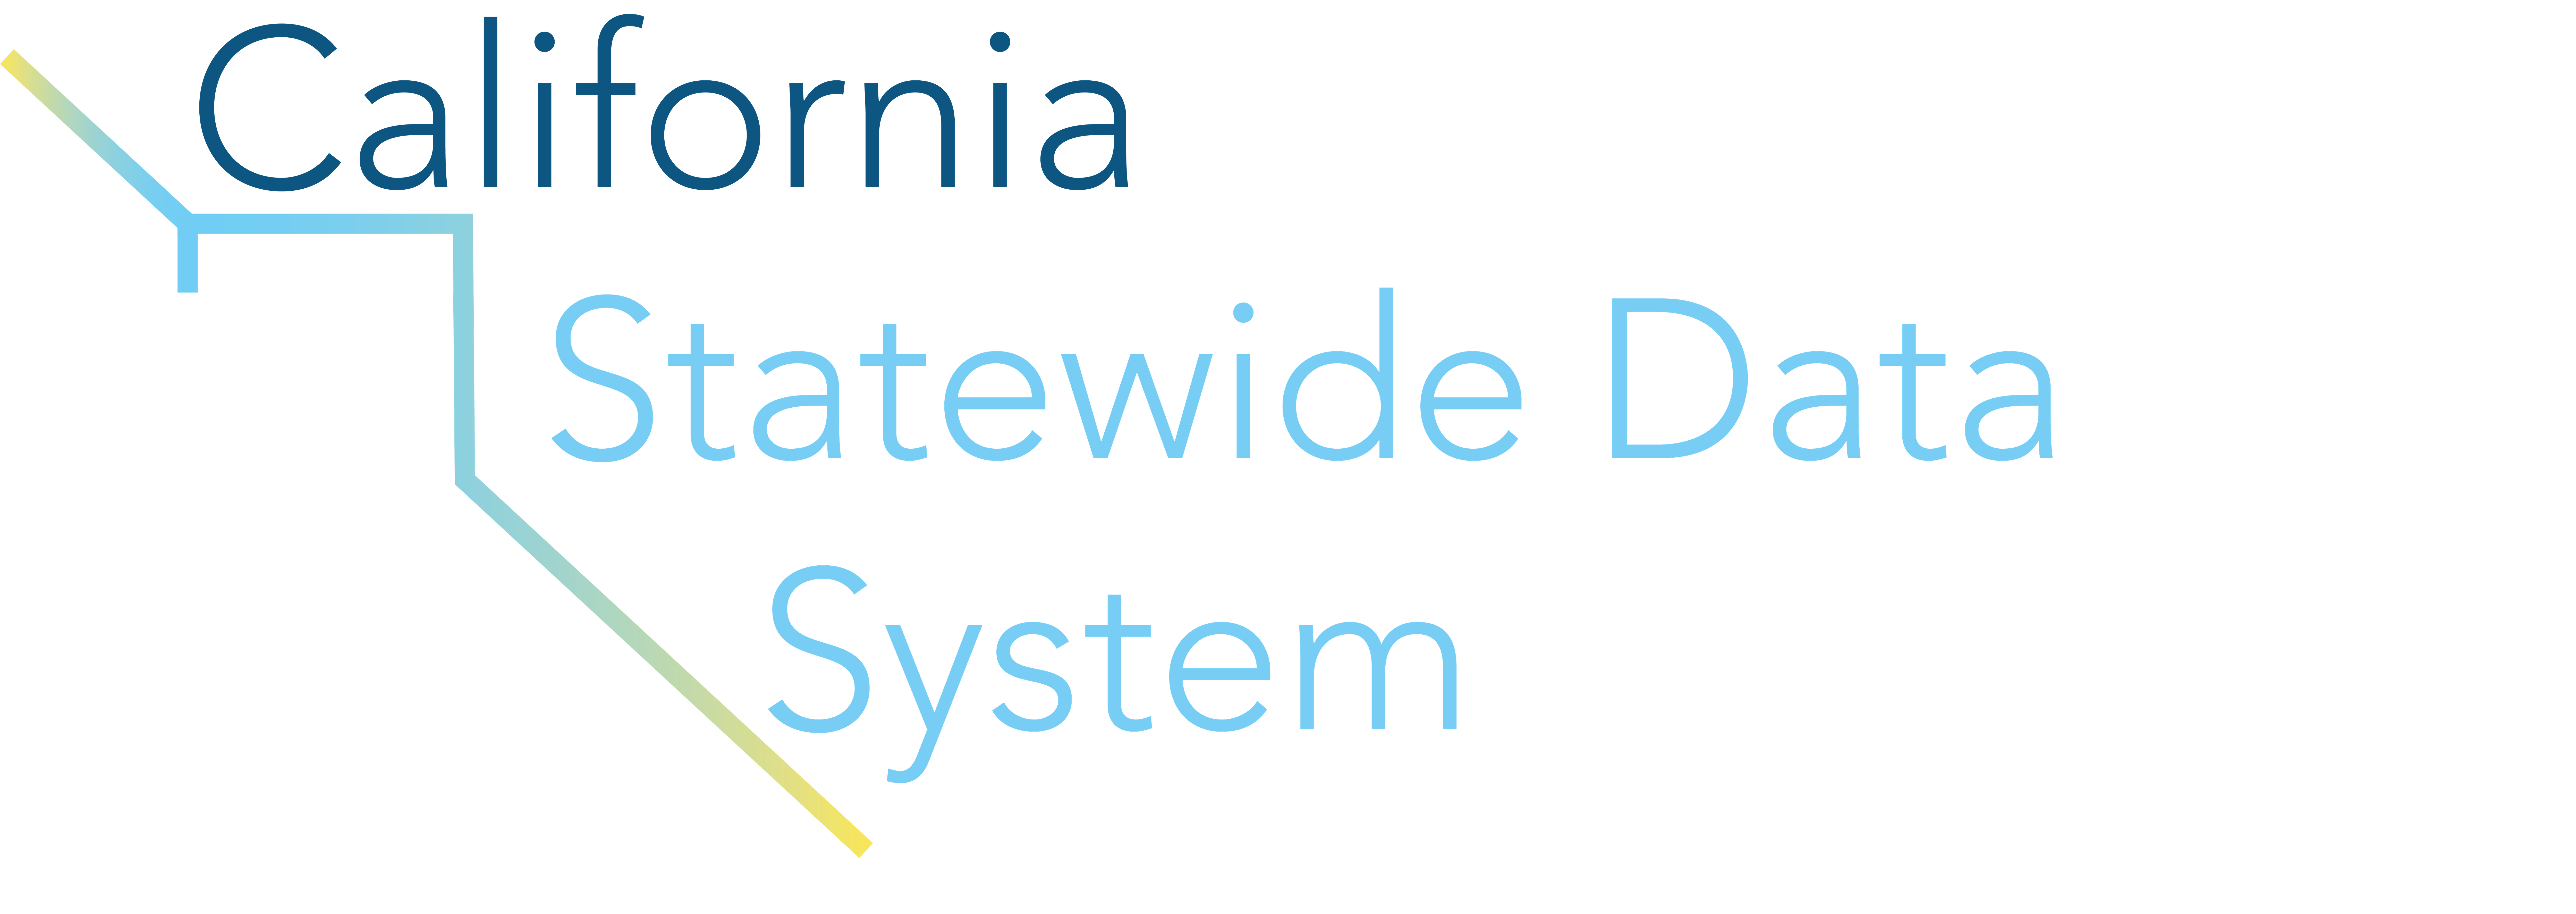 California's Statewide Data System